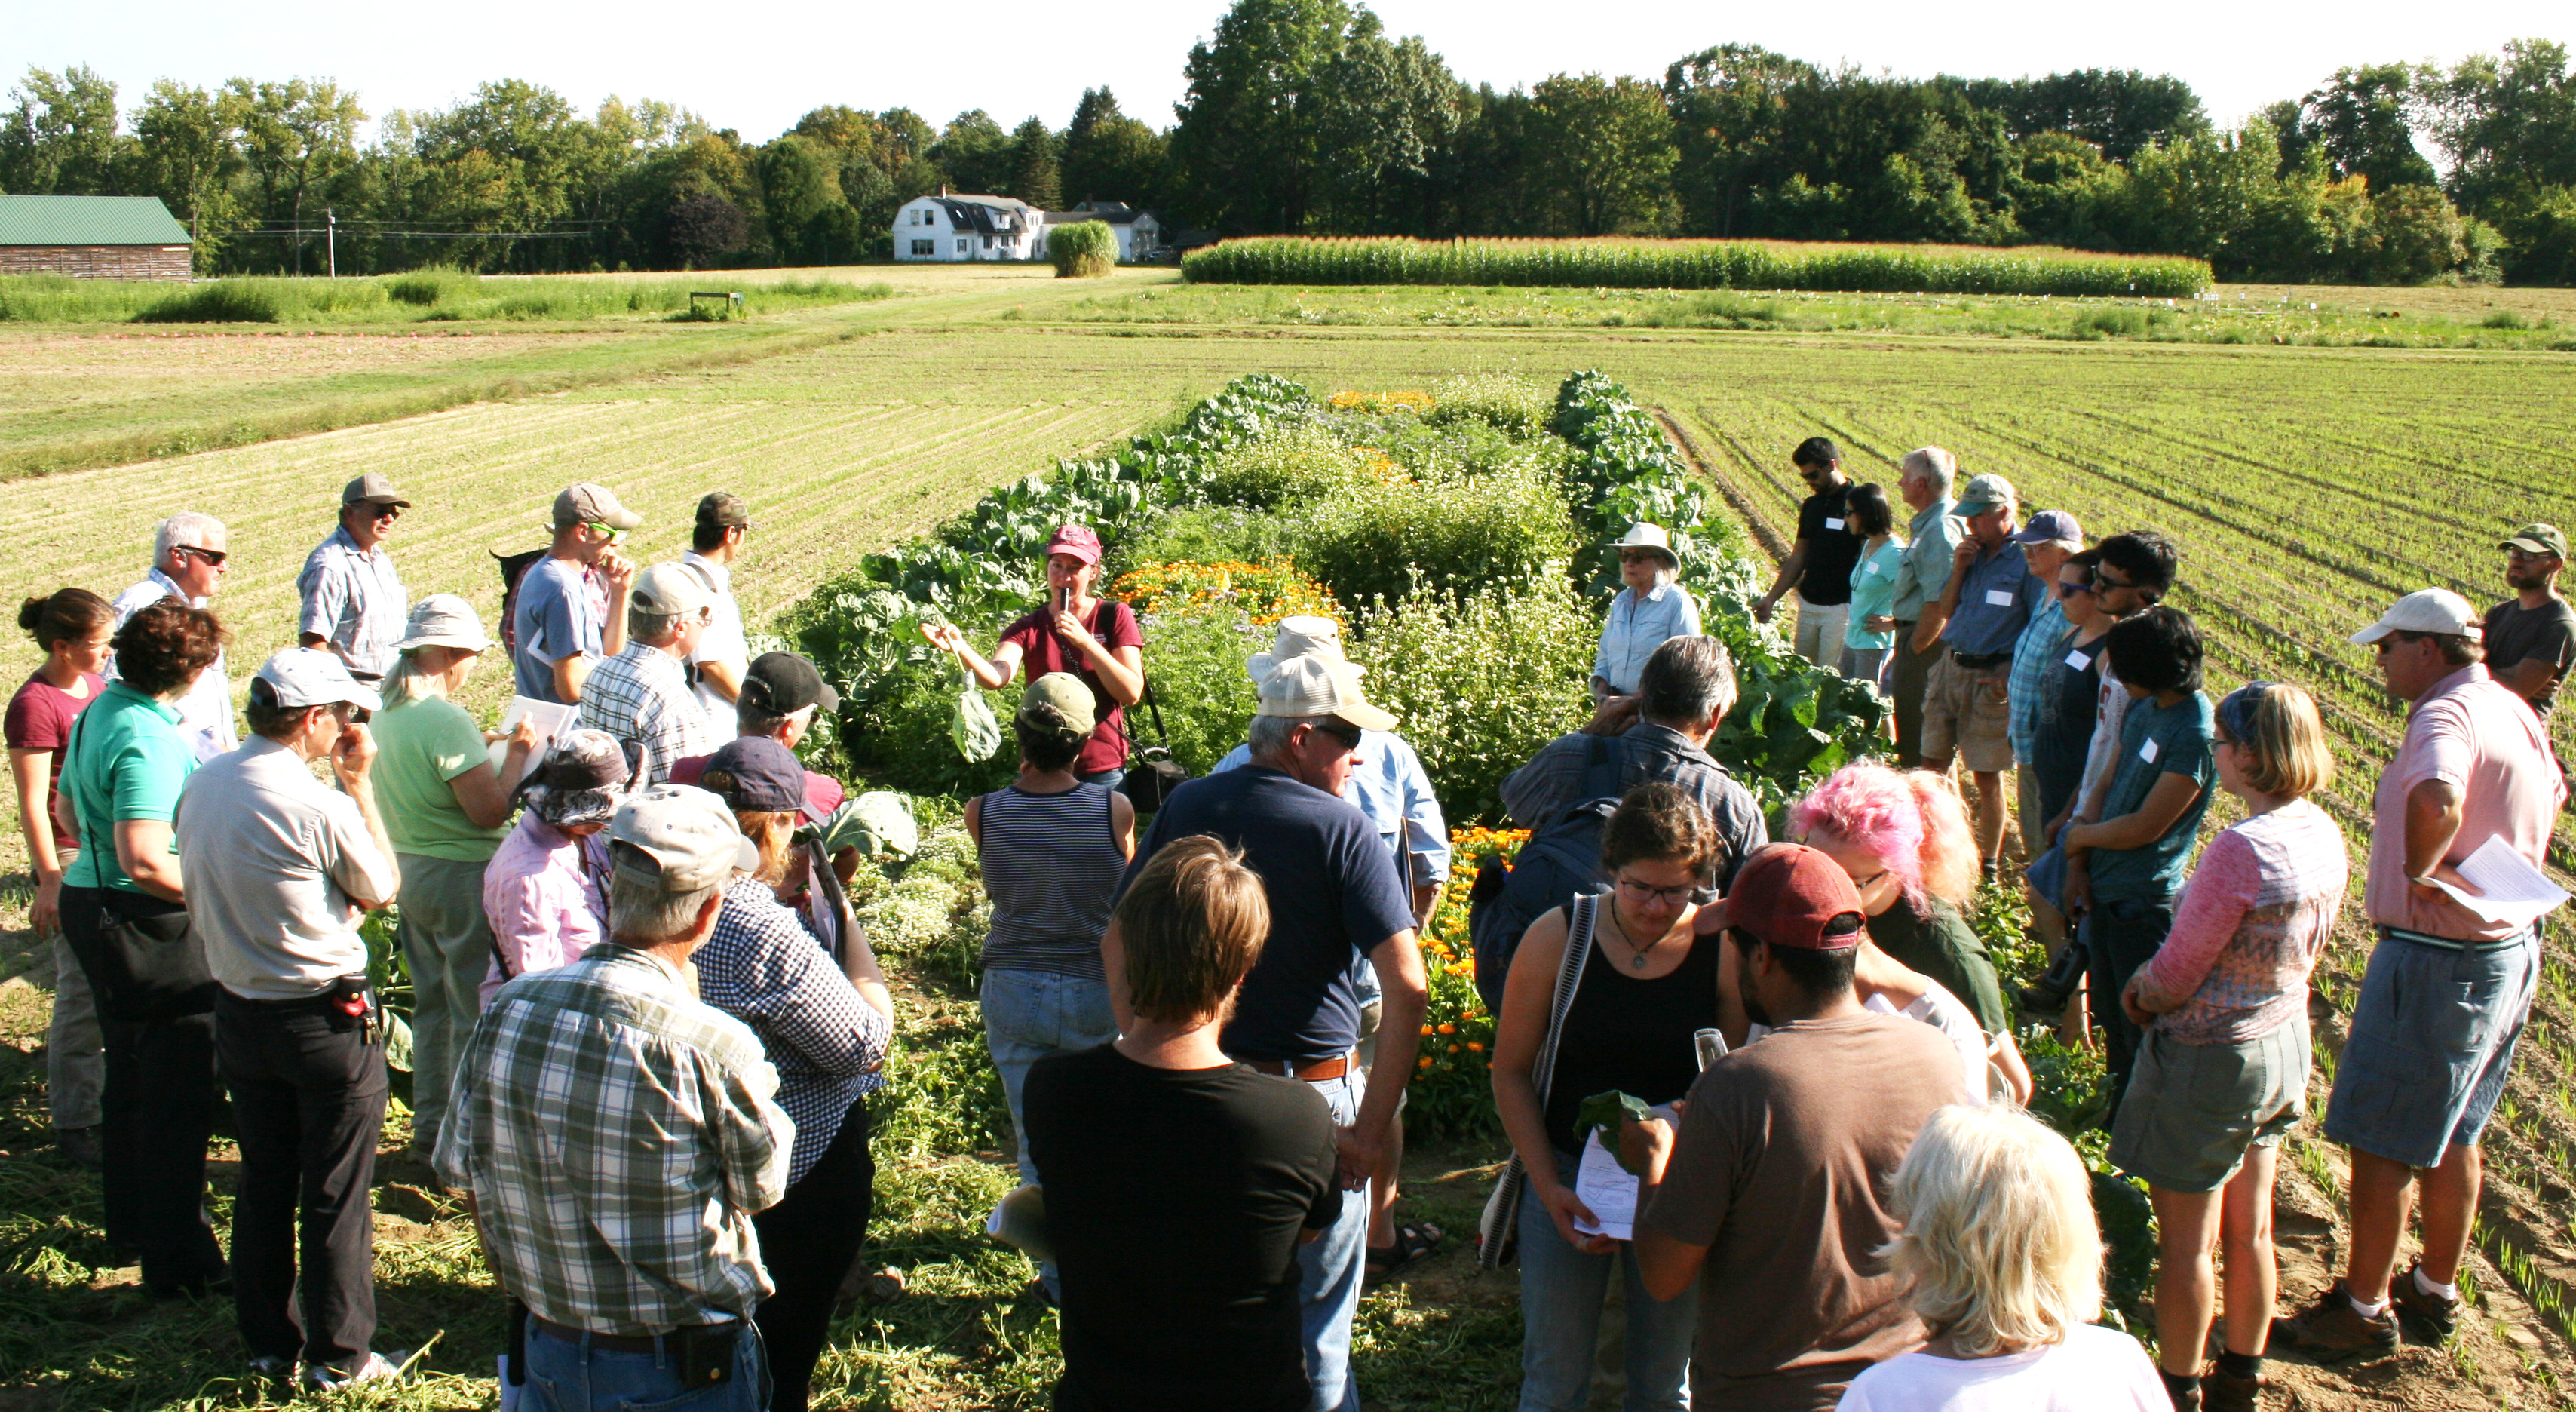 Sue Scheufele, leader of the production agriculture areas in the Extension Agriculture Program, presents to growers at the UMass Crop and Animal Research and Education Farm in South Deerfield.